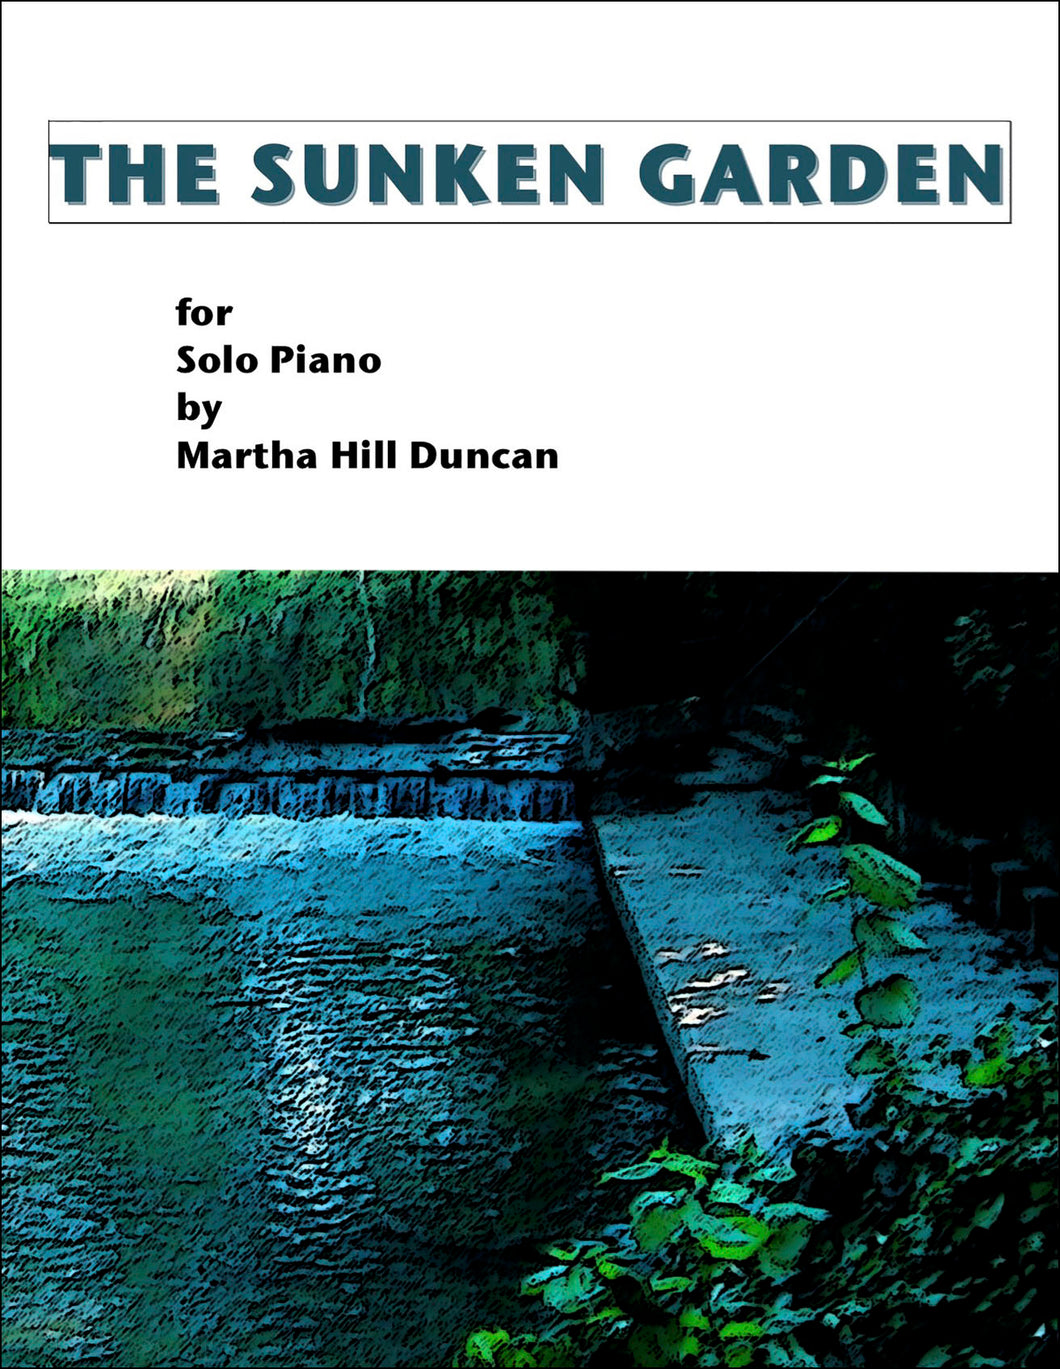 THE RIVER - Piano Solo from THE SUNKEN GARDEN